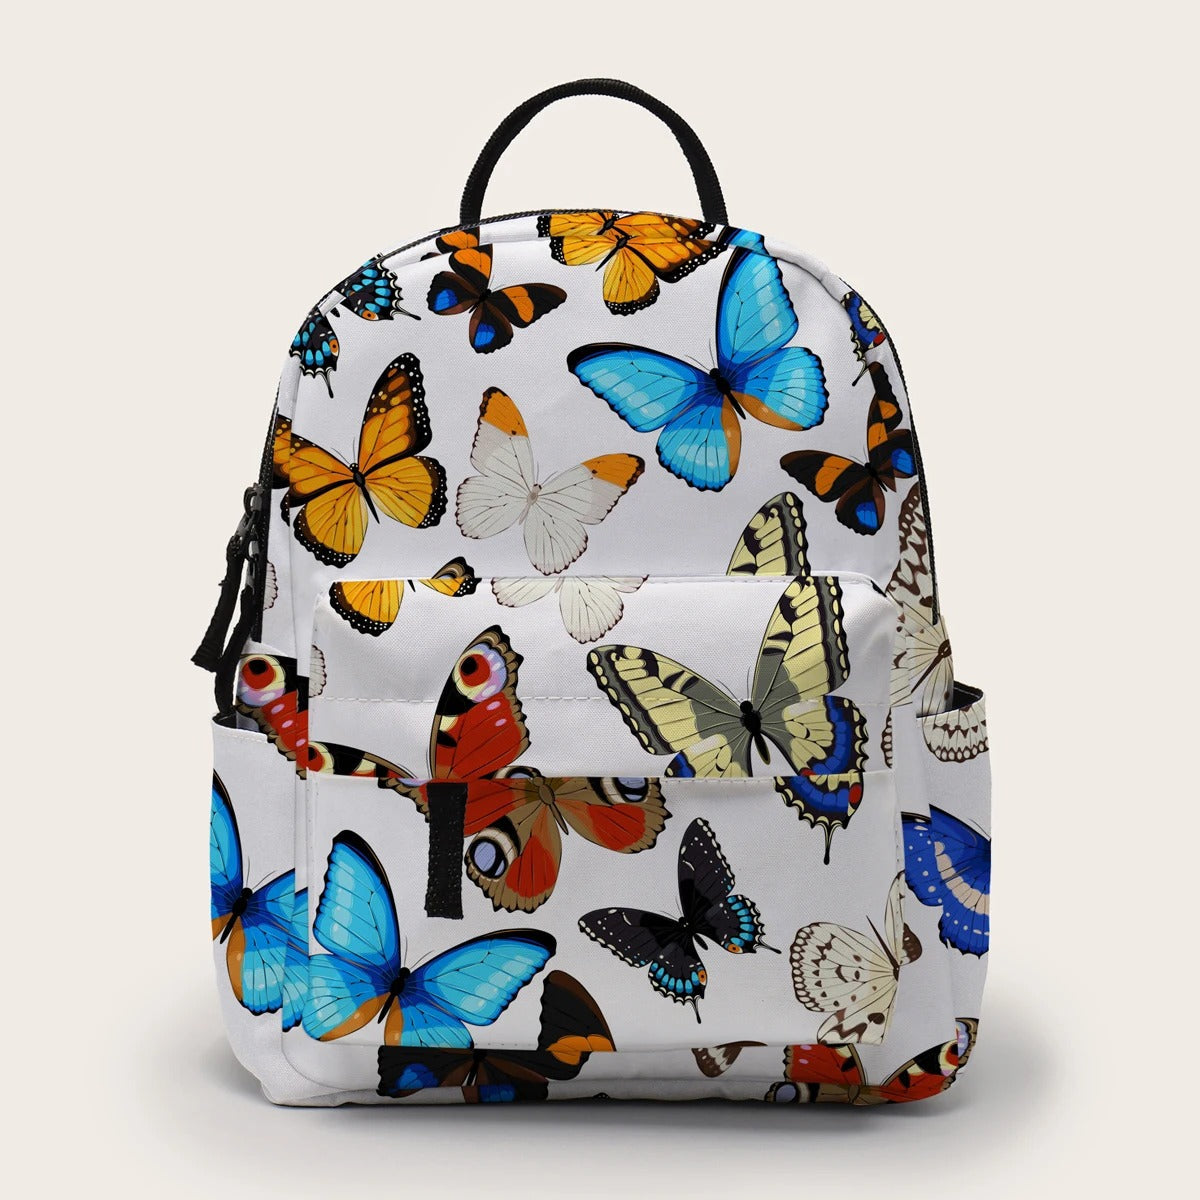 Butterfly Backpack for School - MNSB - 24